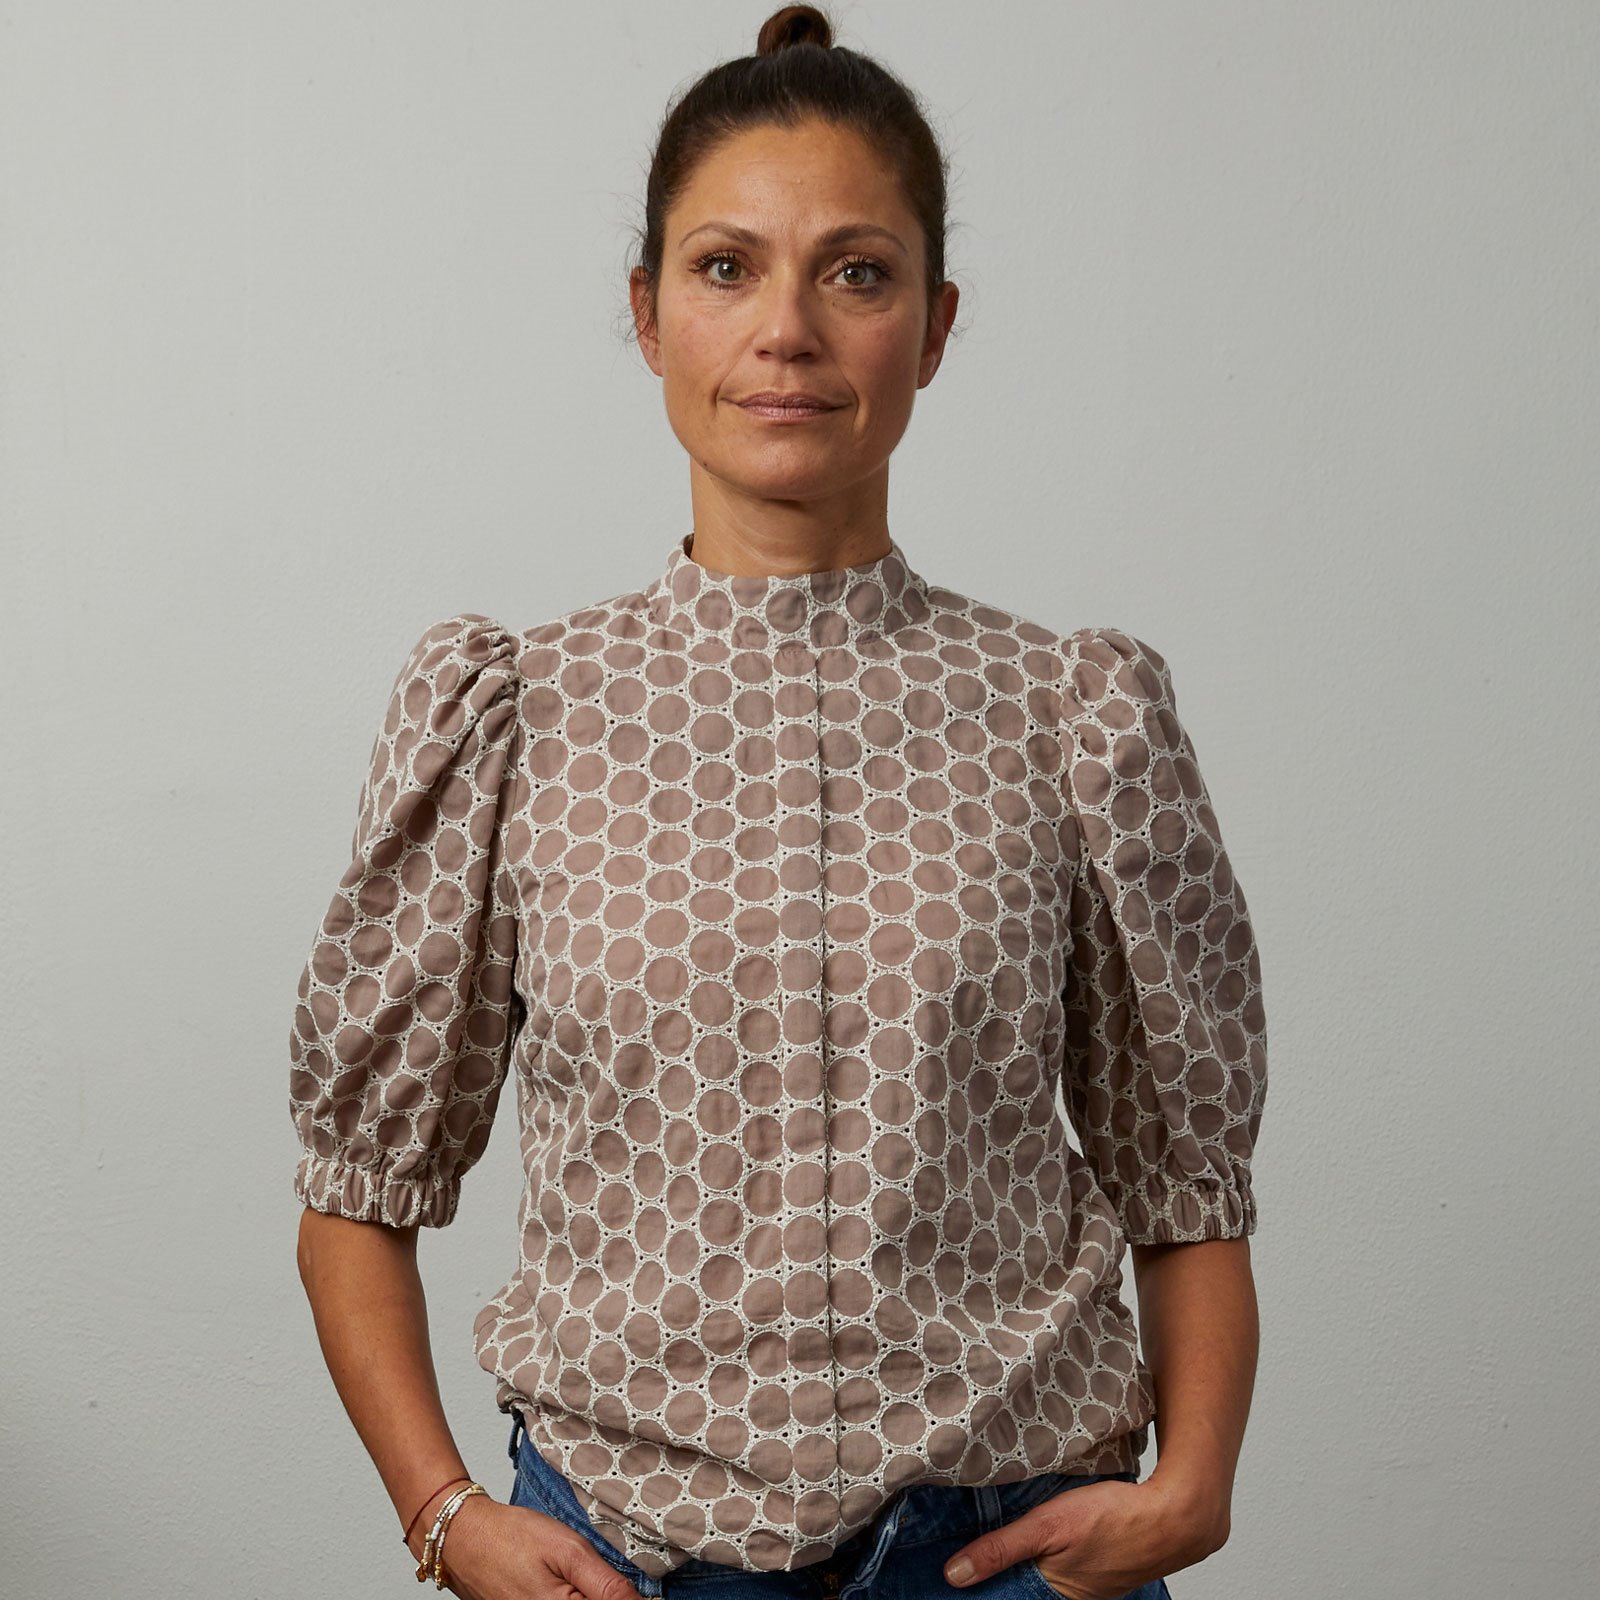 Design your own blouse, 42/14 p22075_cg_image_a.jpg